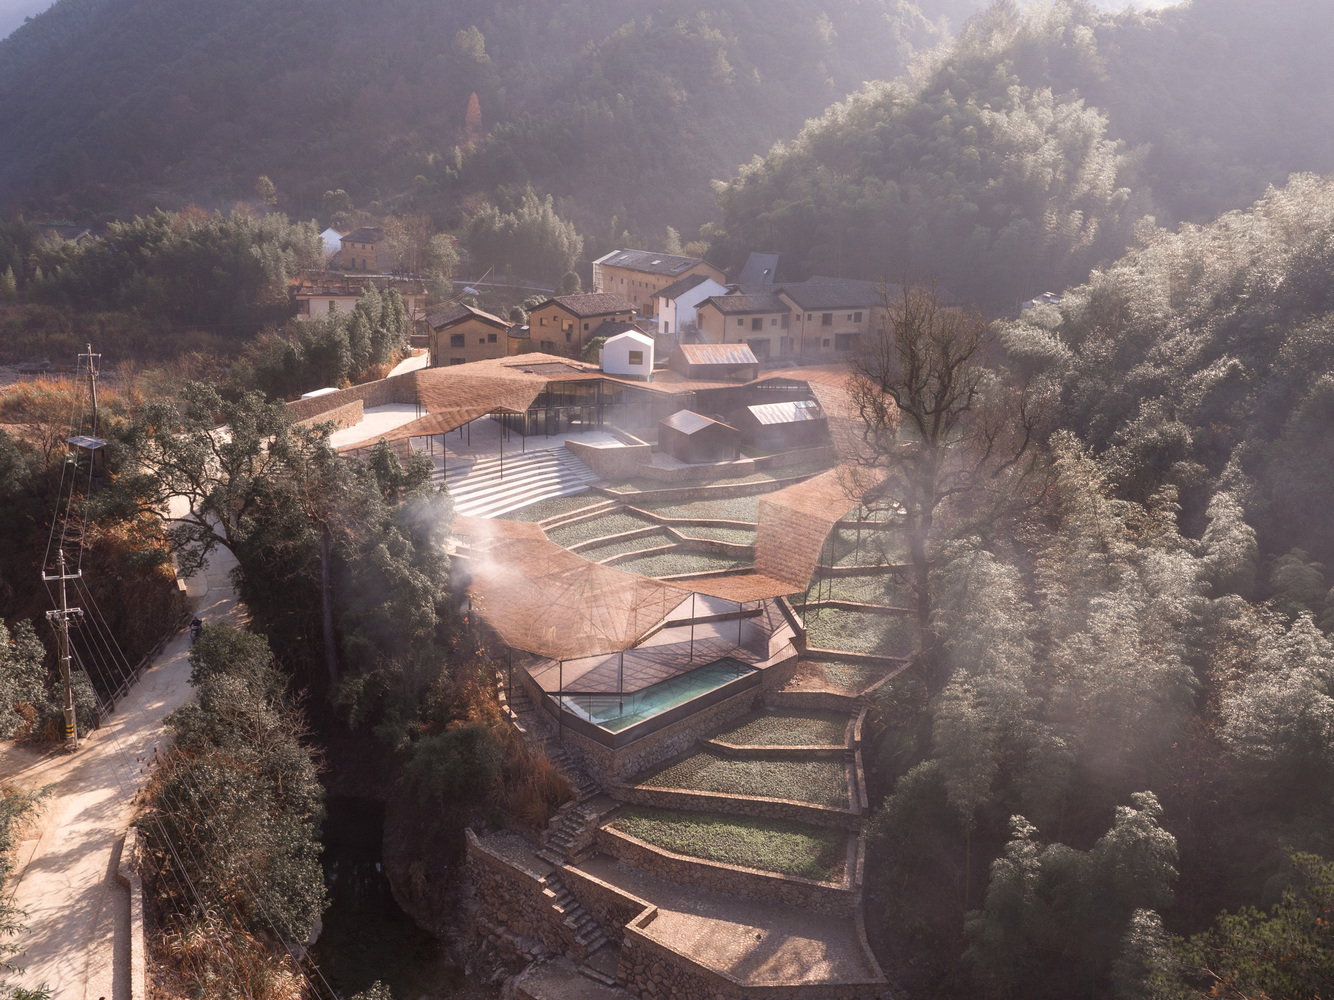 Aerial view of the Sou Fujimoto-designed Flowing Cloud pavilion in China